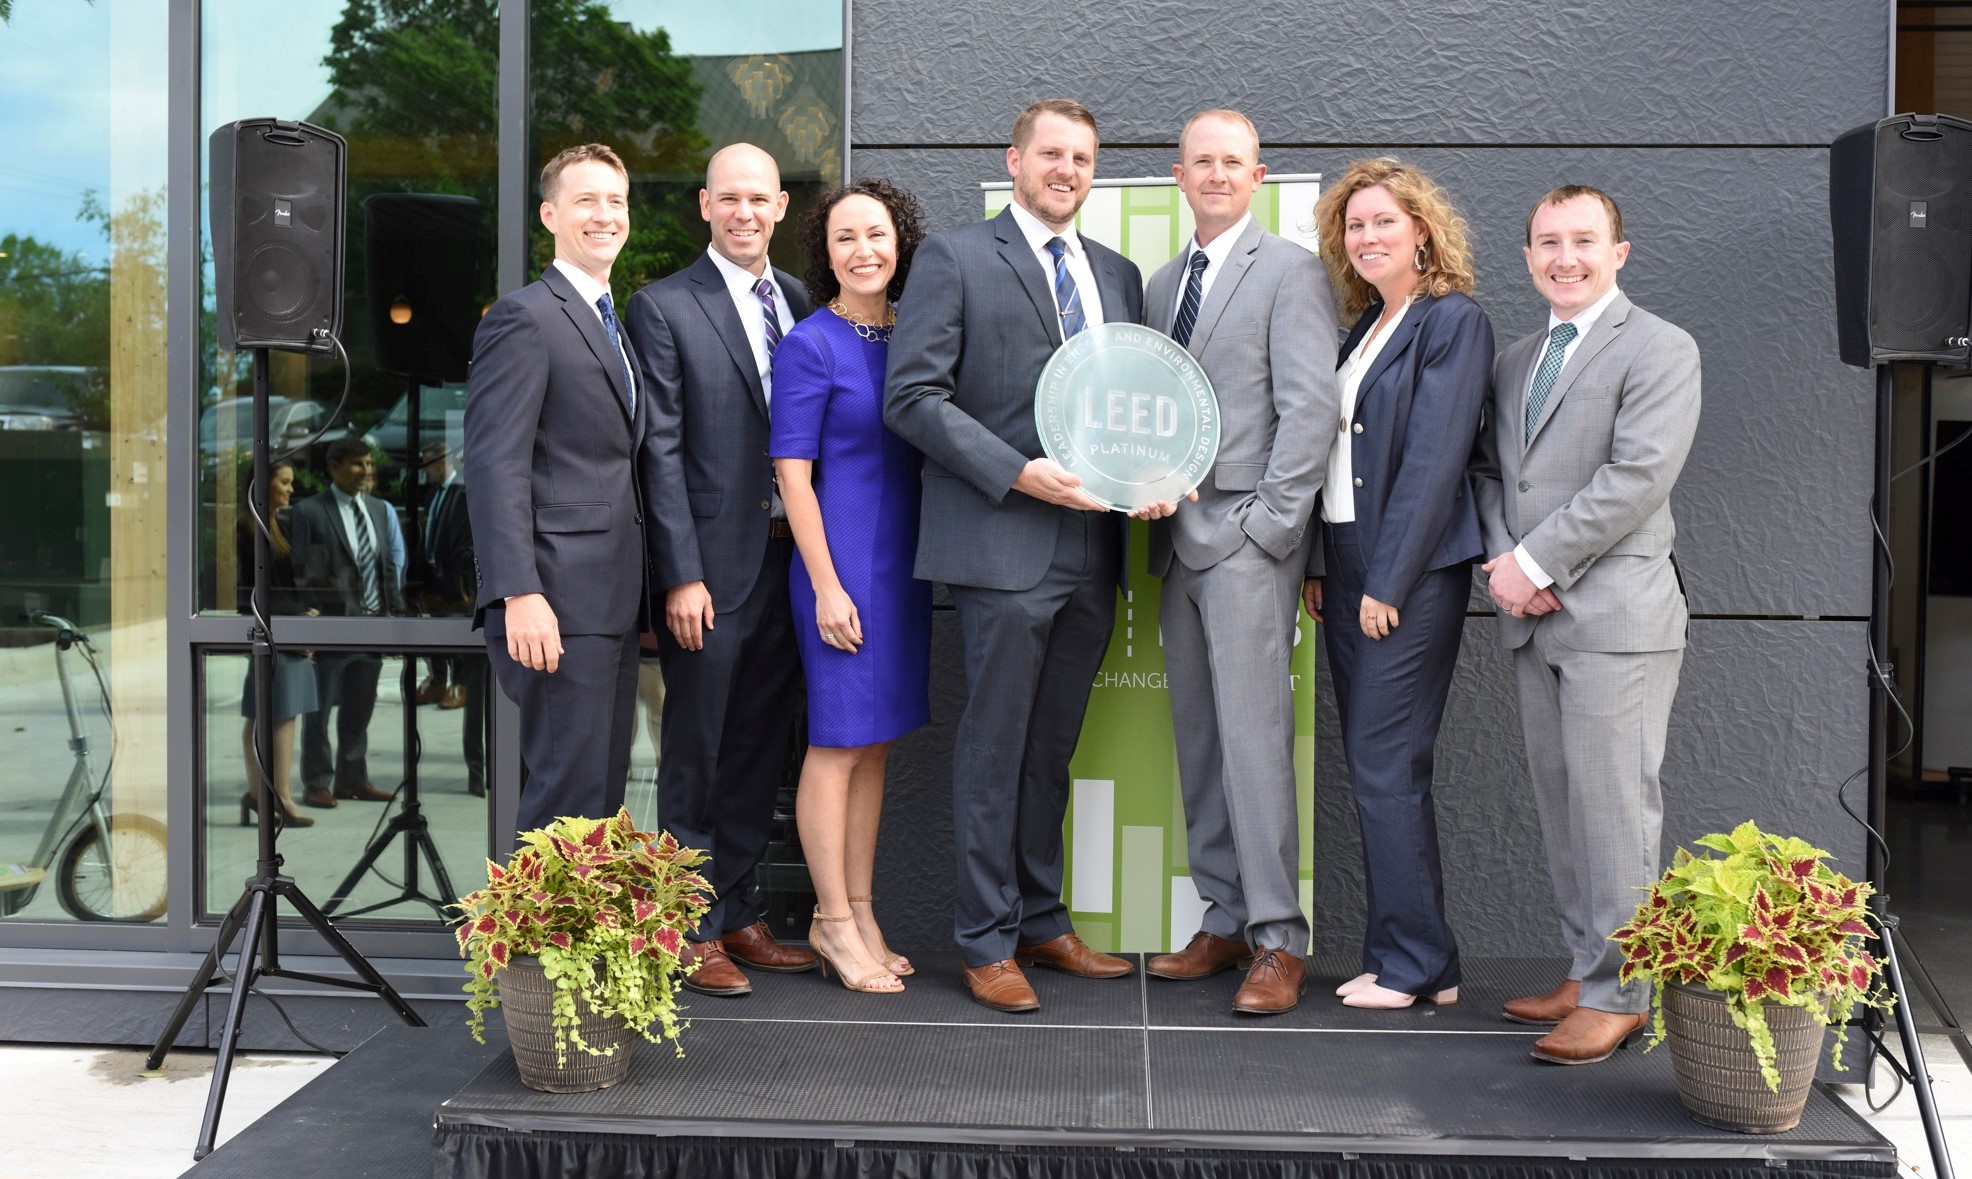 Project team with the LEED plaque